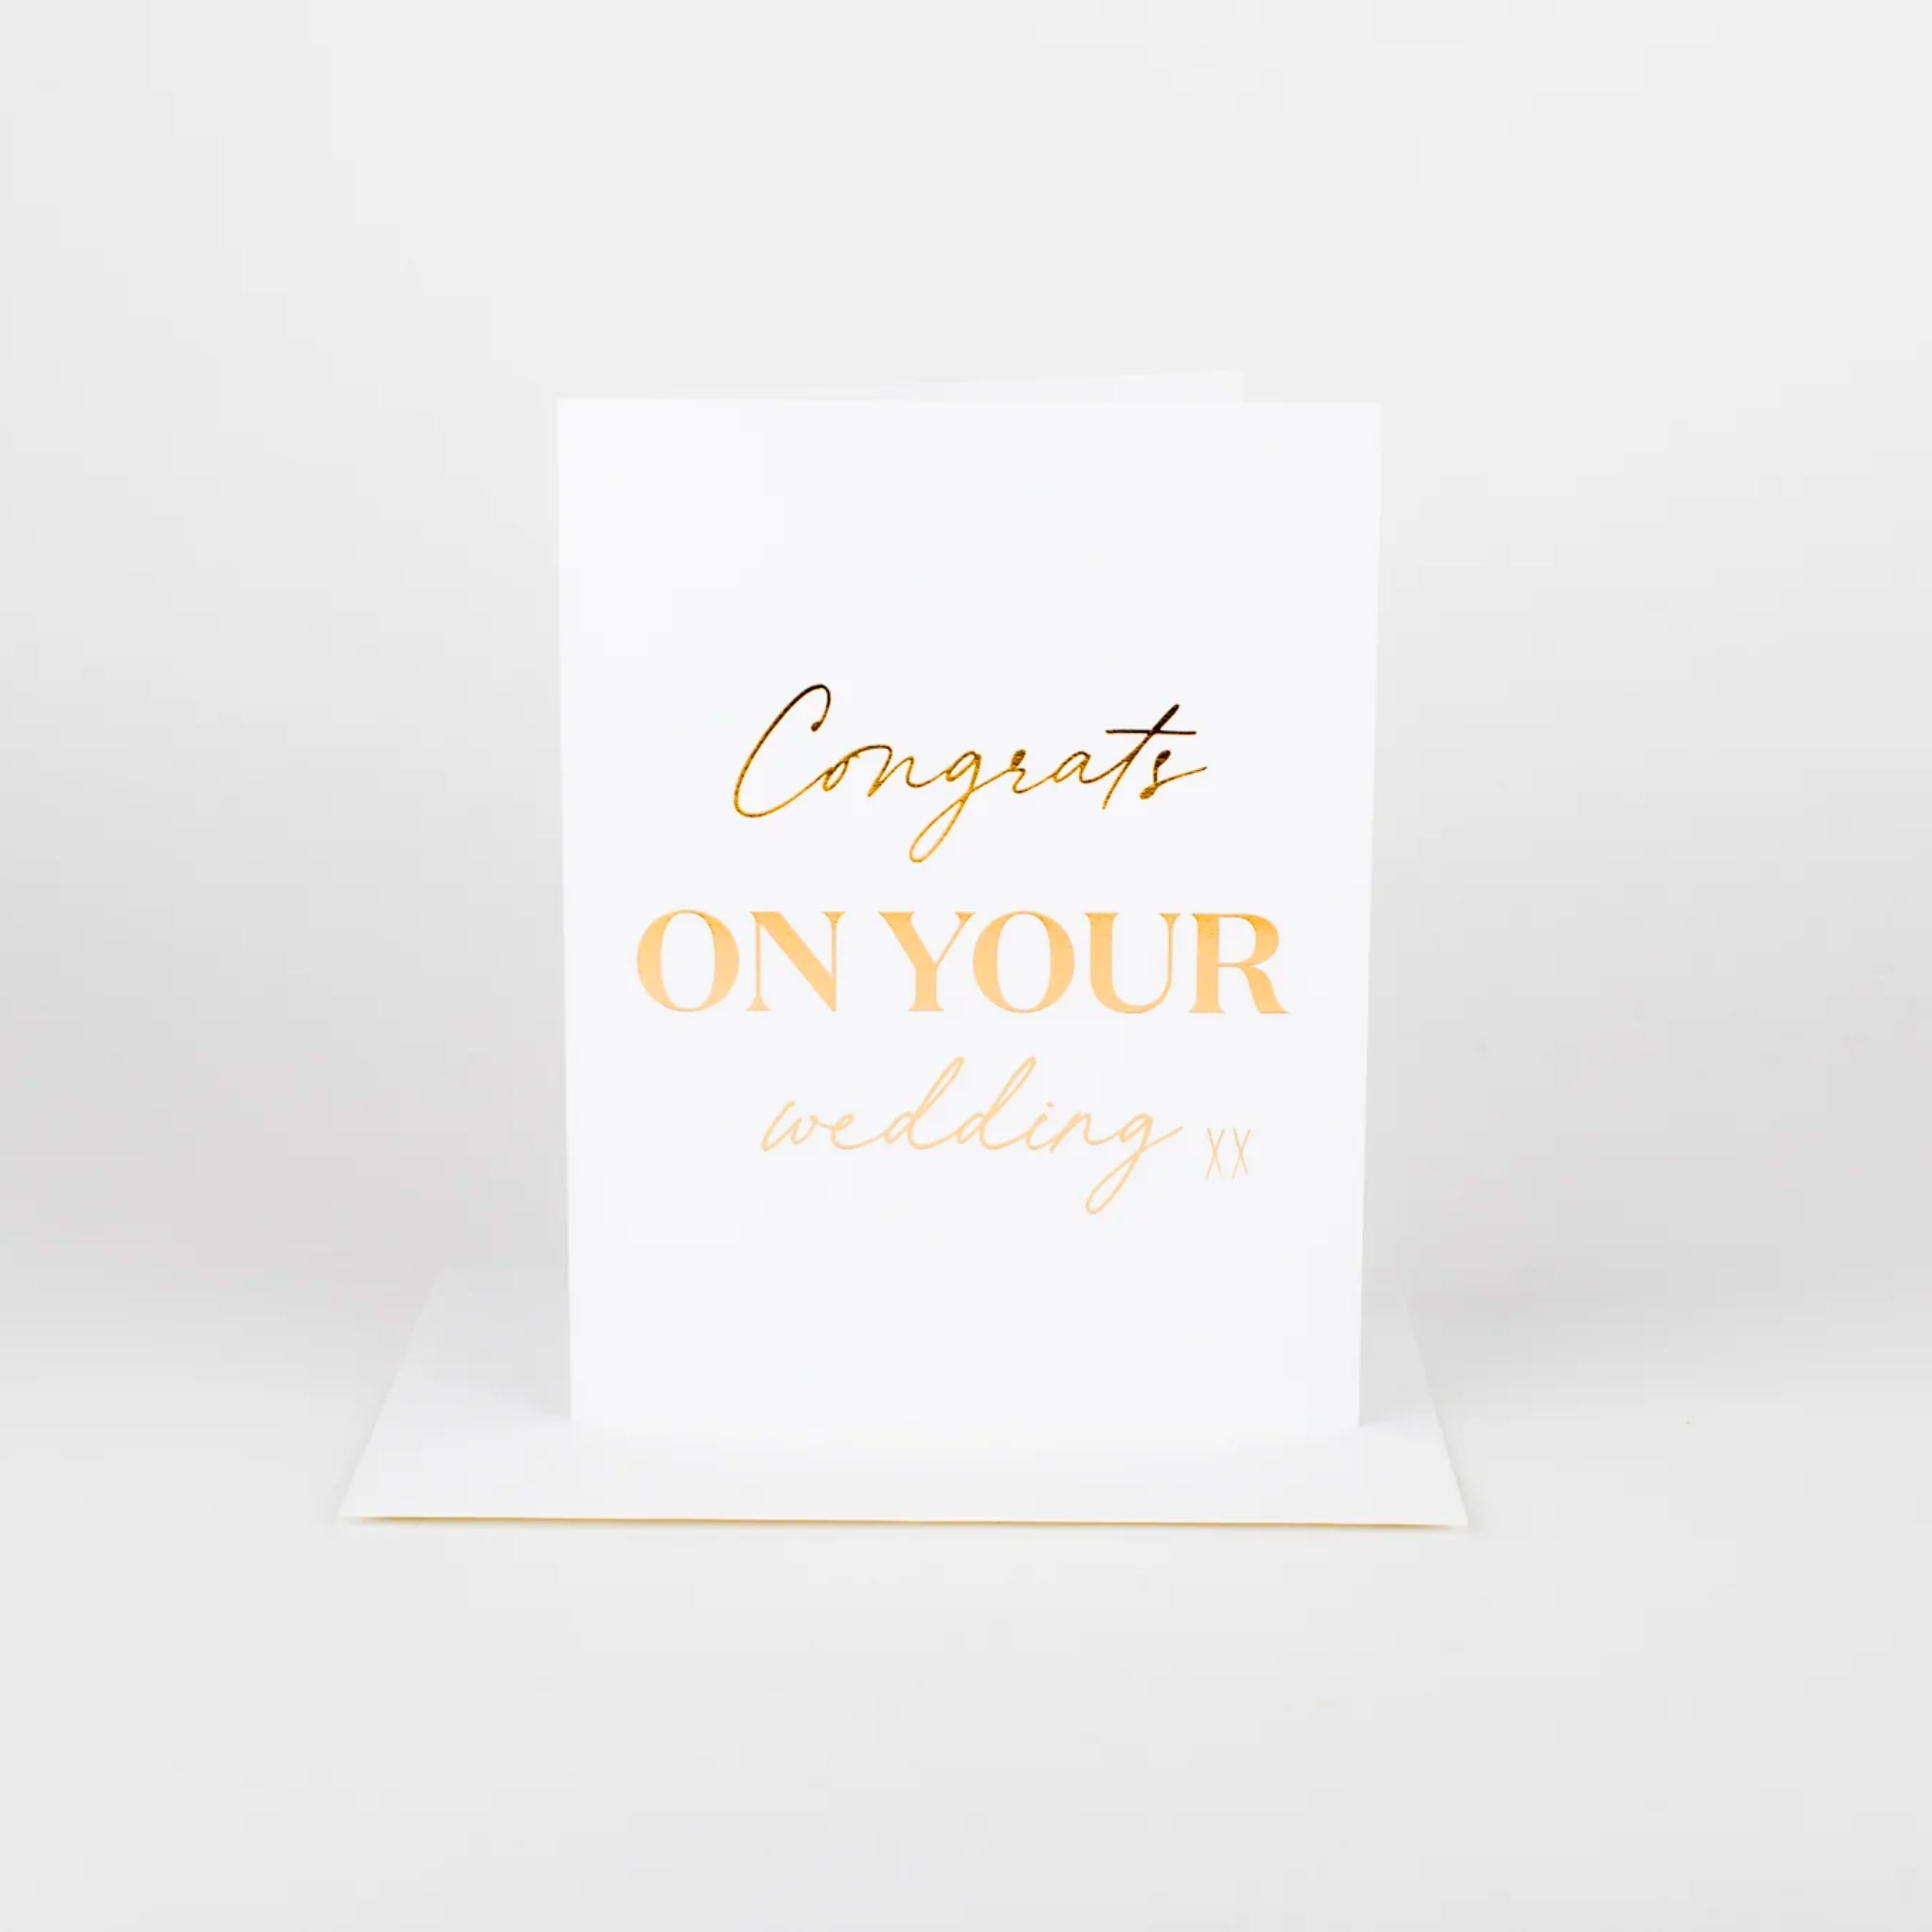 Congrats On Your Wedding Day Card